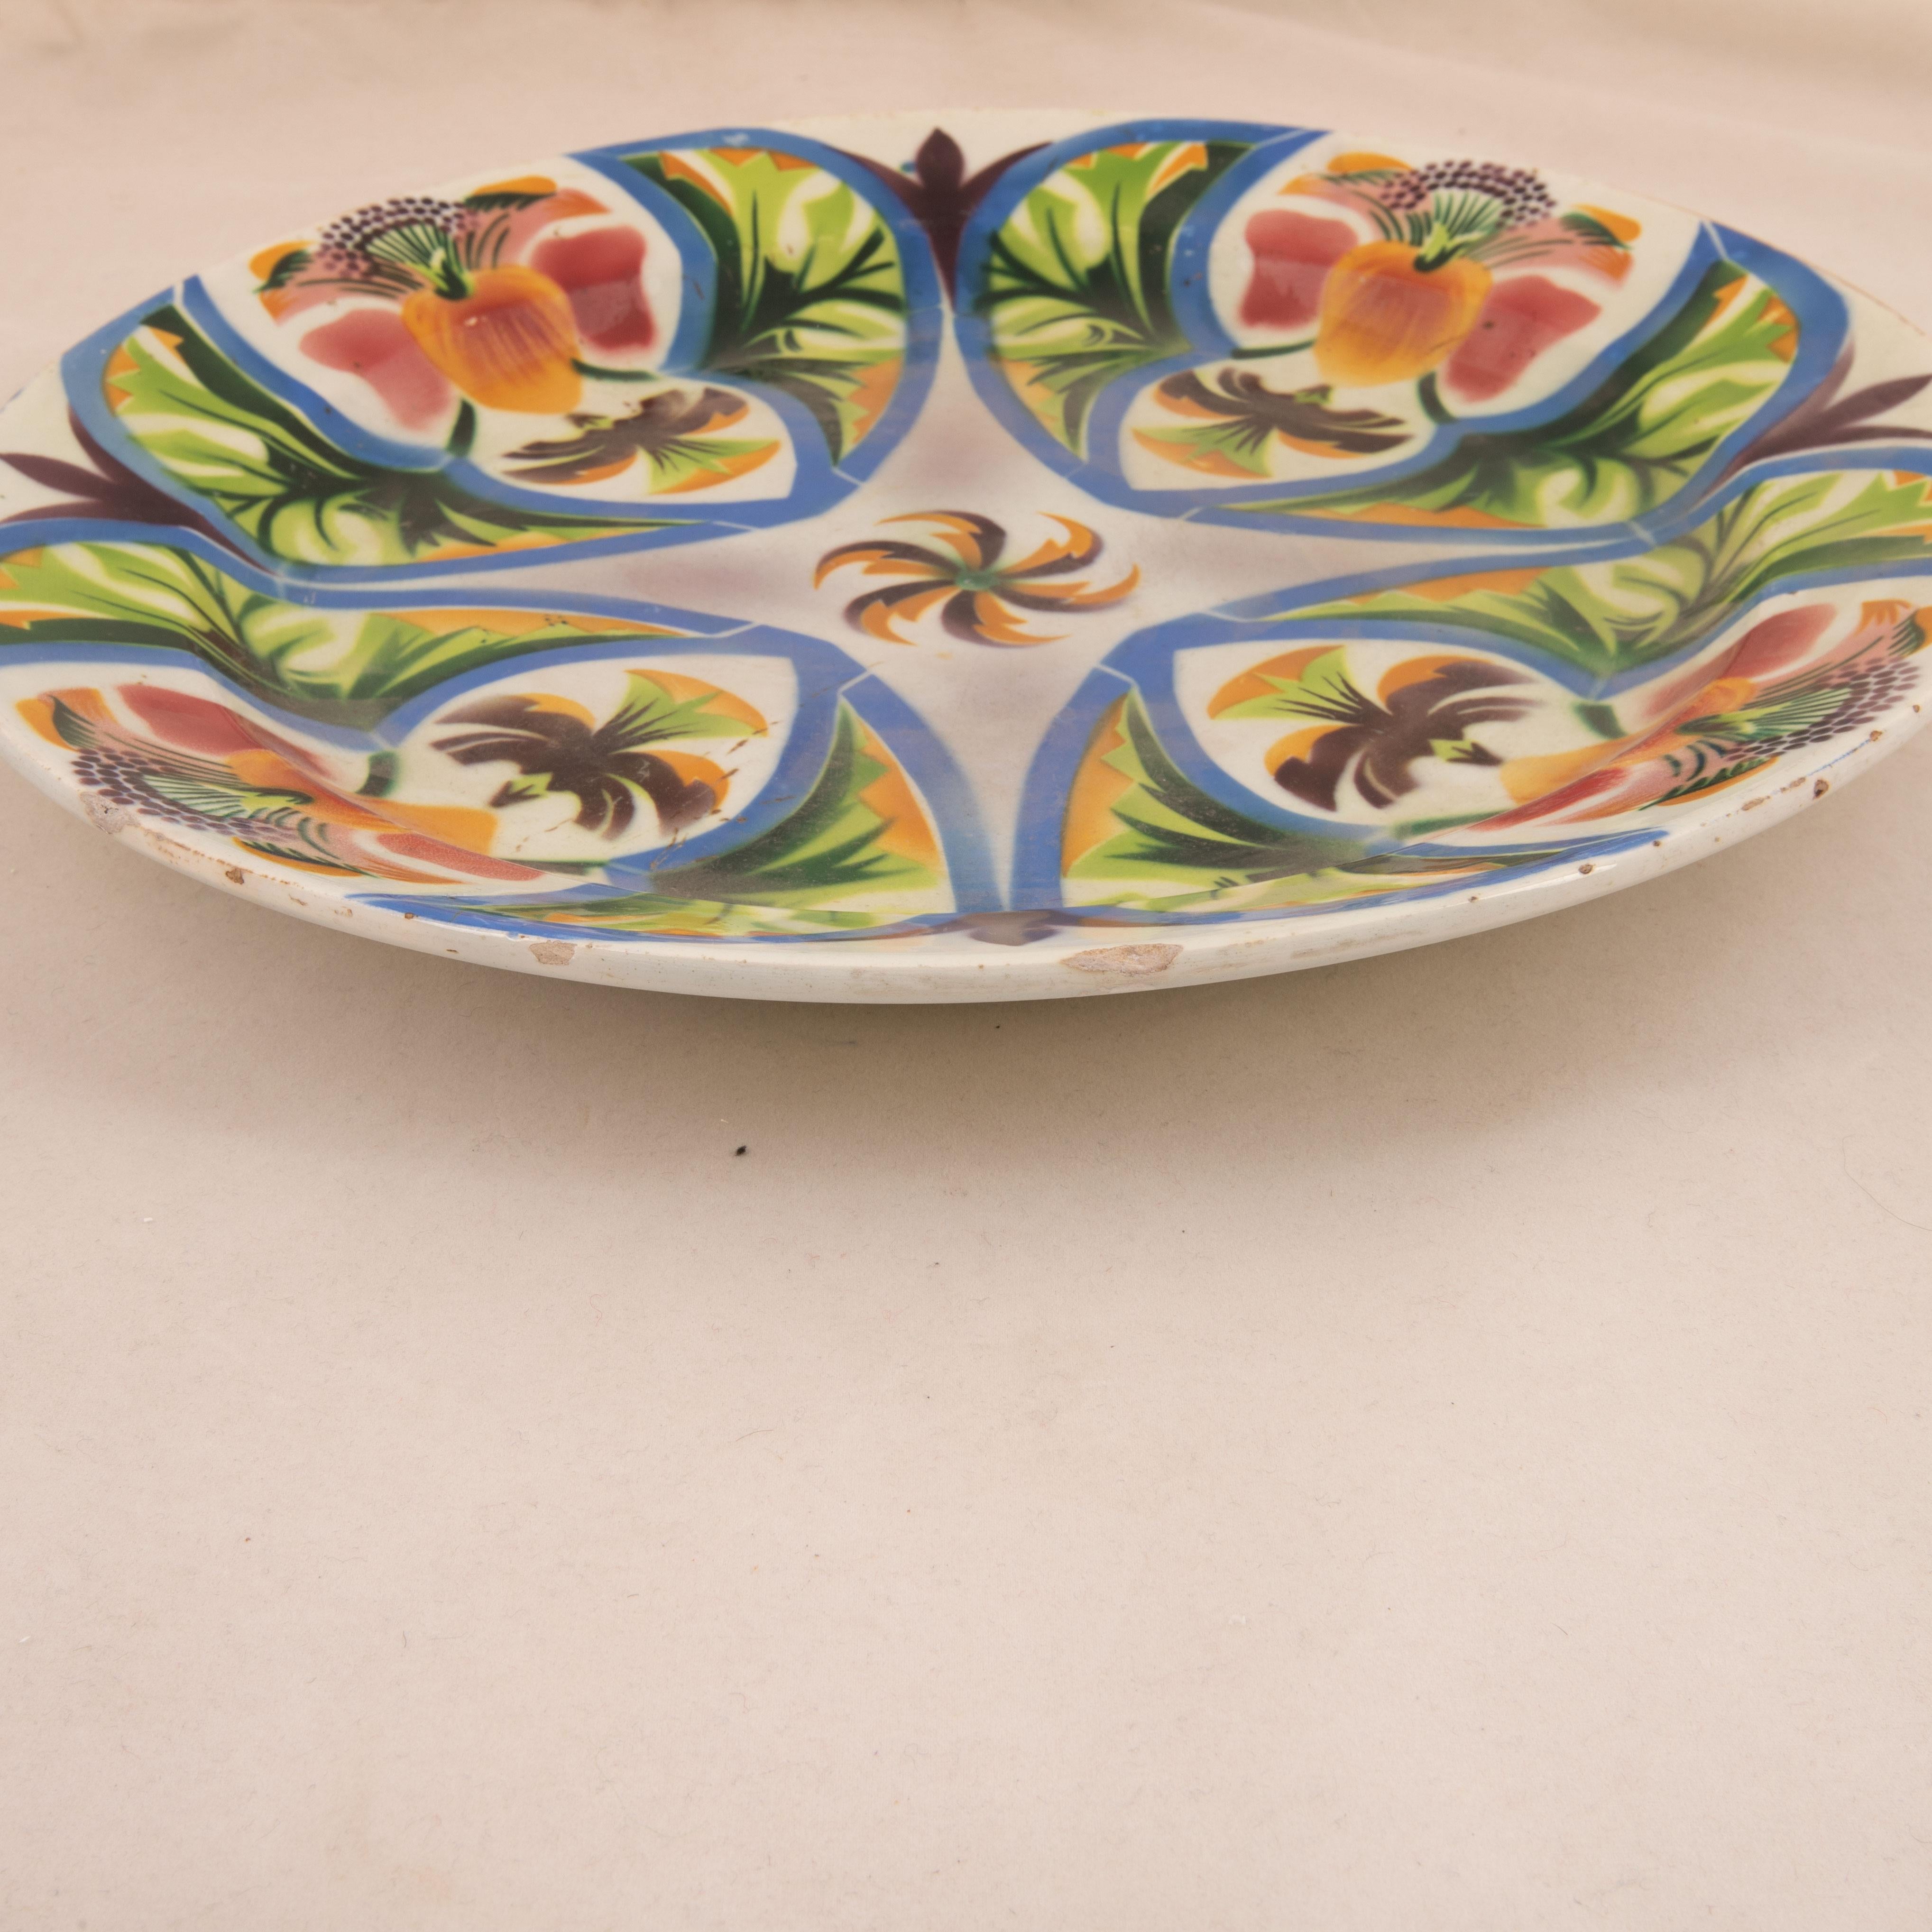 Hand-Painted Kuznetsov Ceramic Plate, Rare Design, Russia, Early 20th Century For Sale